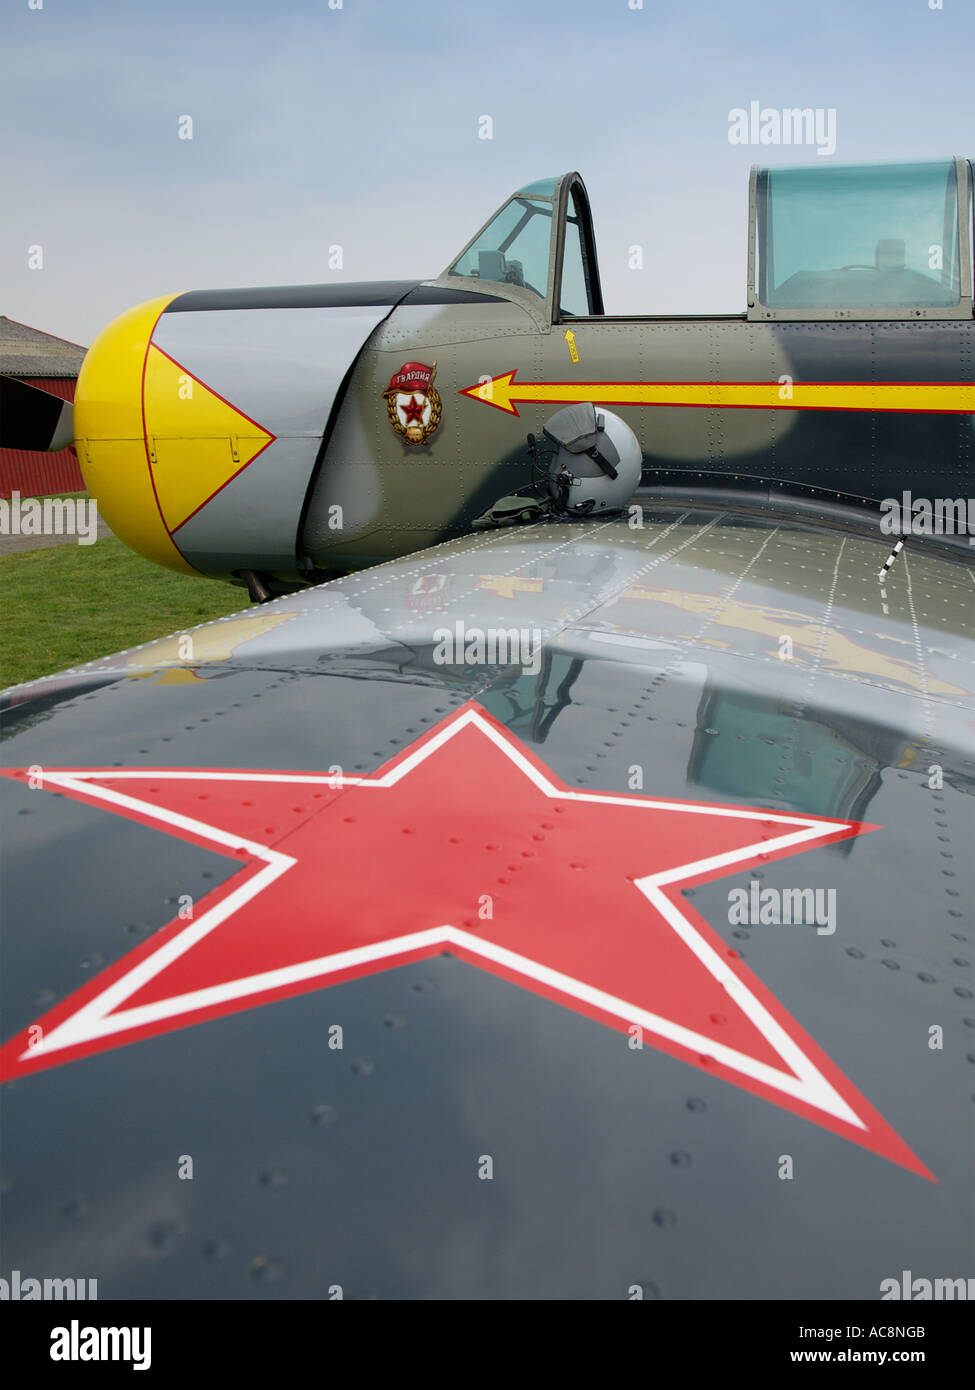 Yakovlev Yak 52 pilots helmet sitting on Yak 52 wing with big red star in the foreground Stock Photo